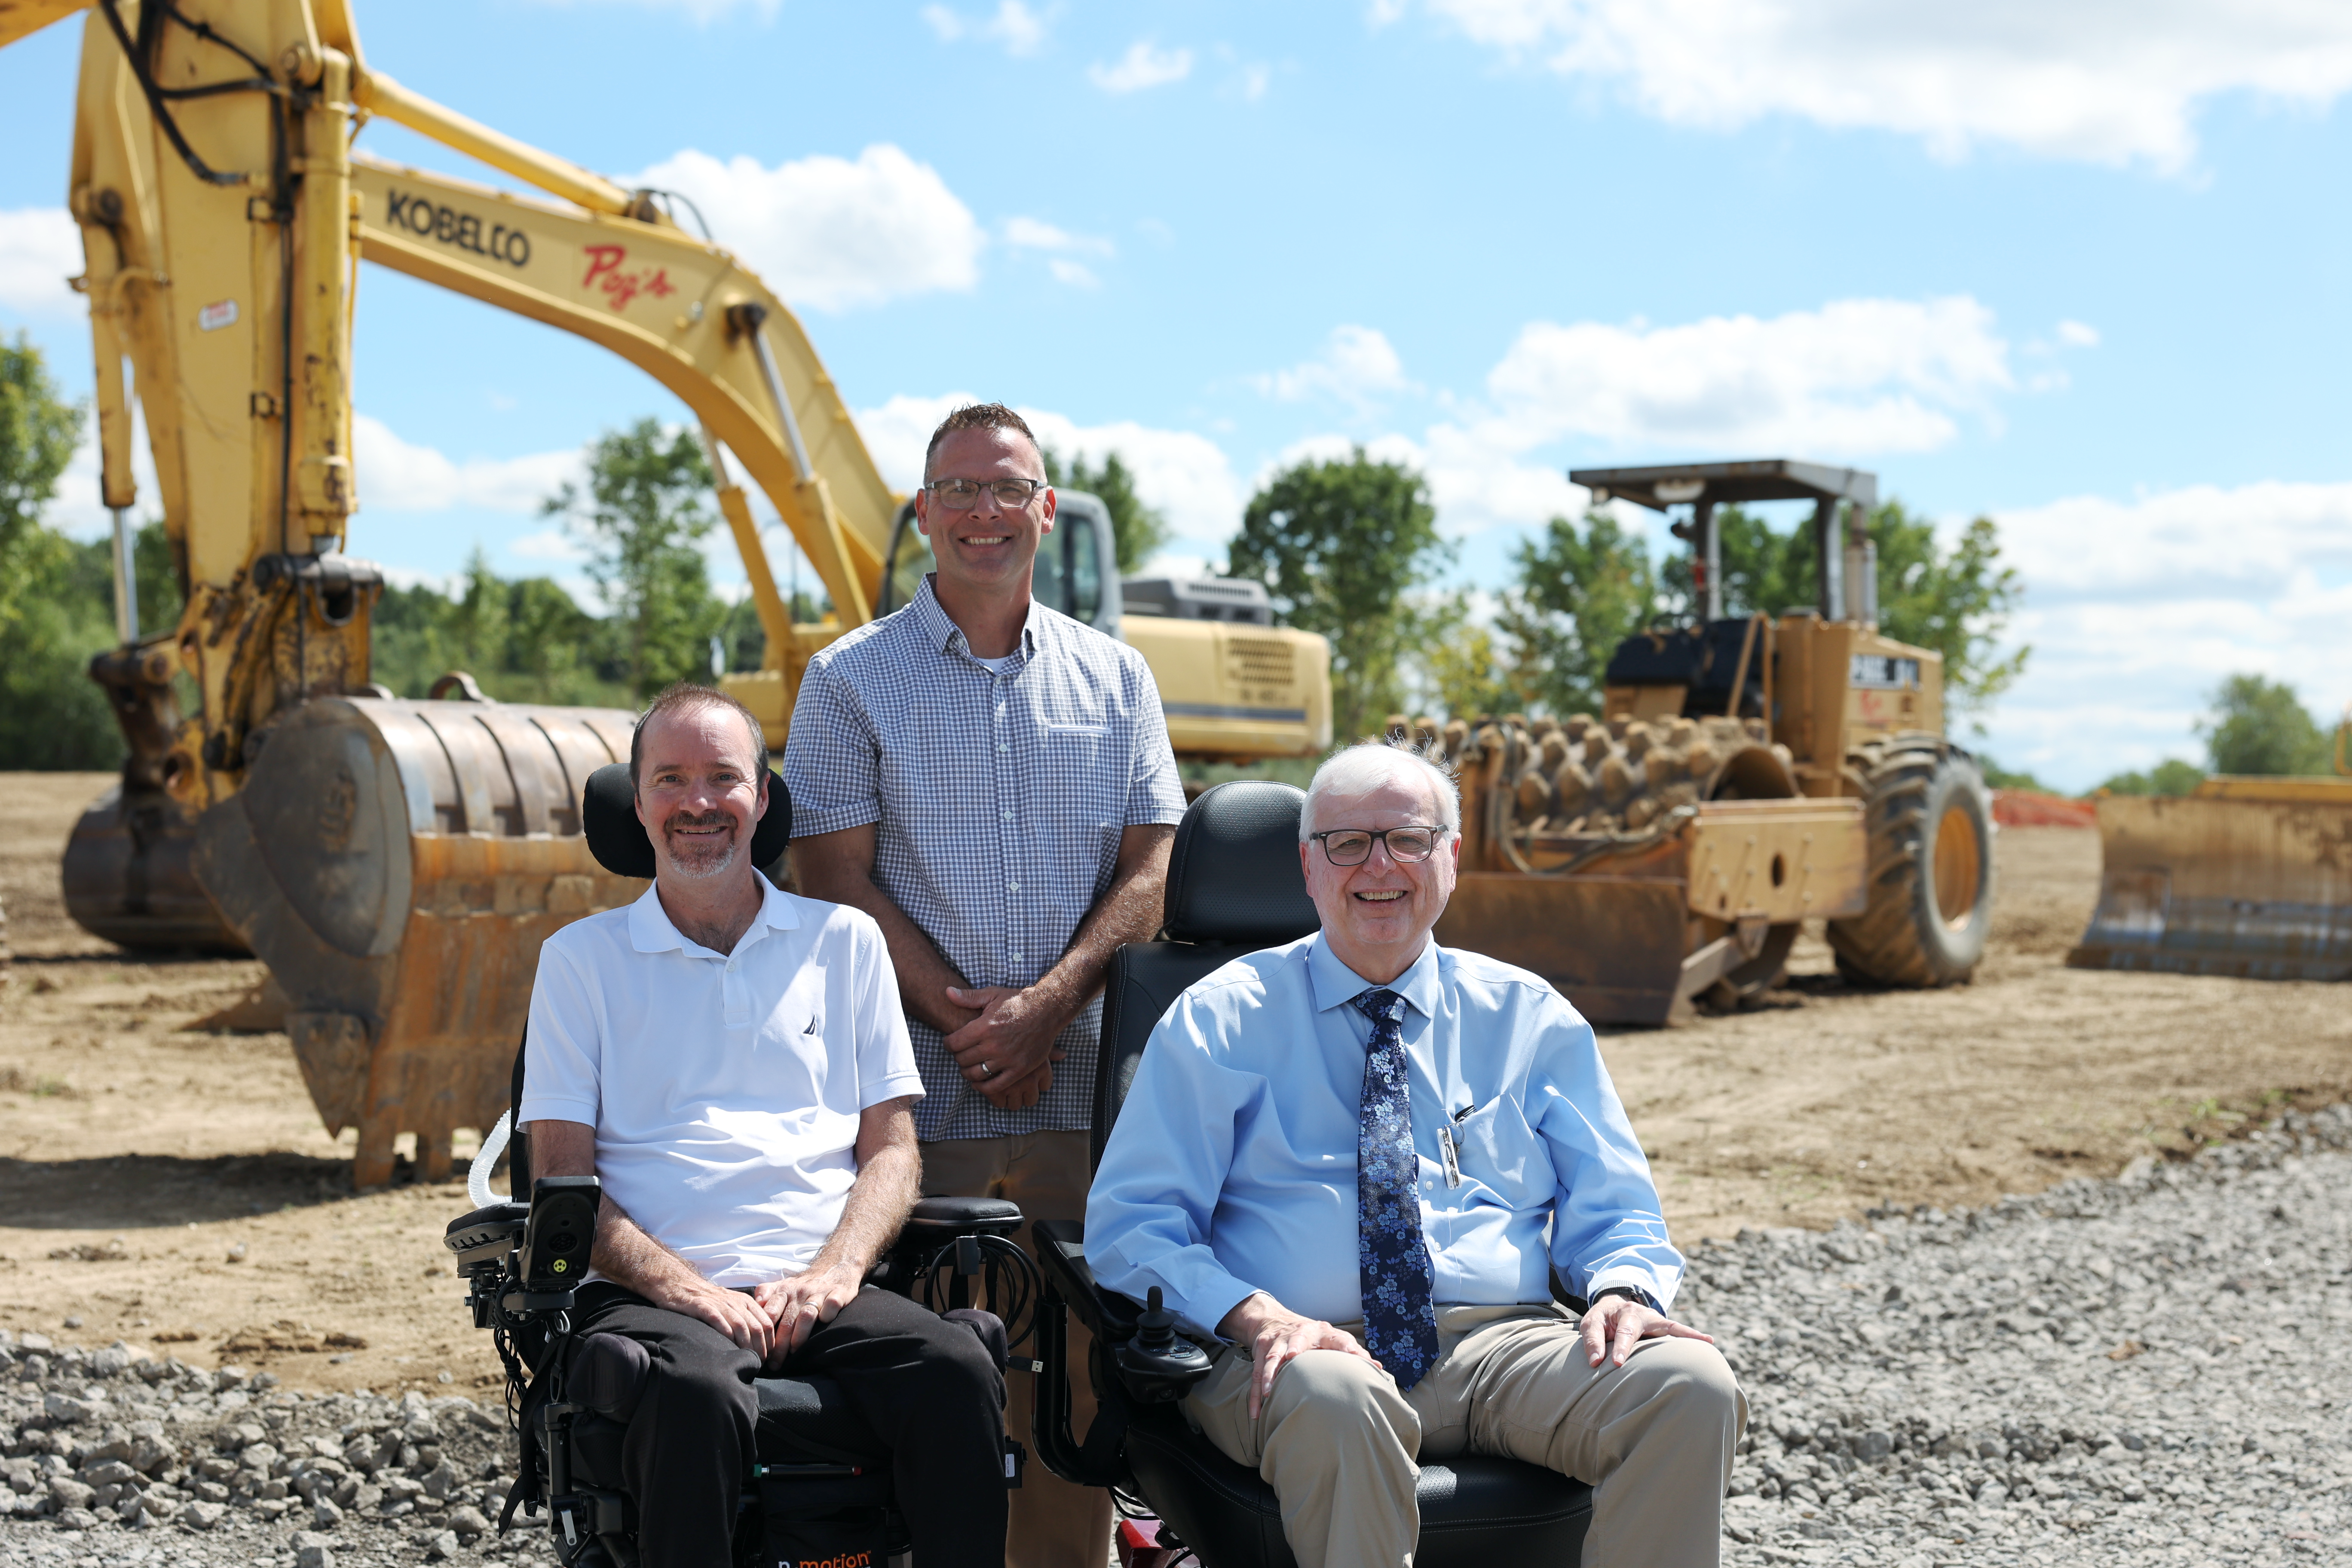 Three smiling men at a construction site, with excavator and bulldozer in the background.